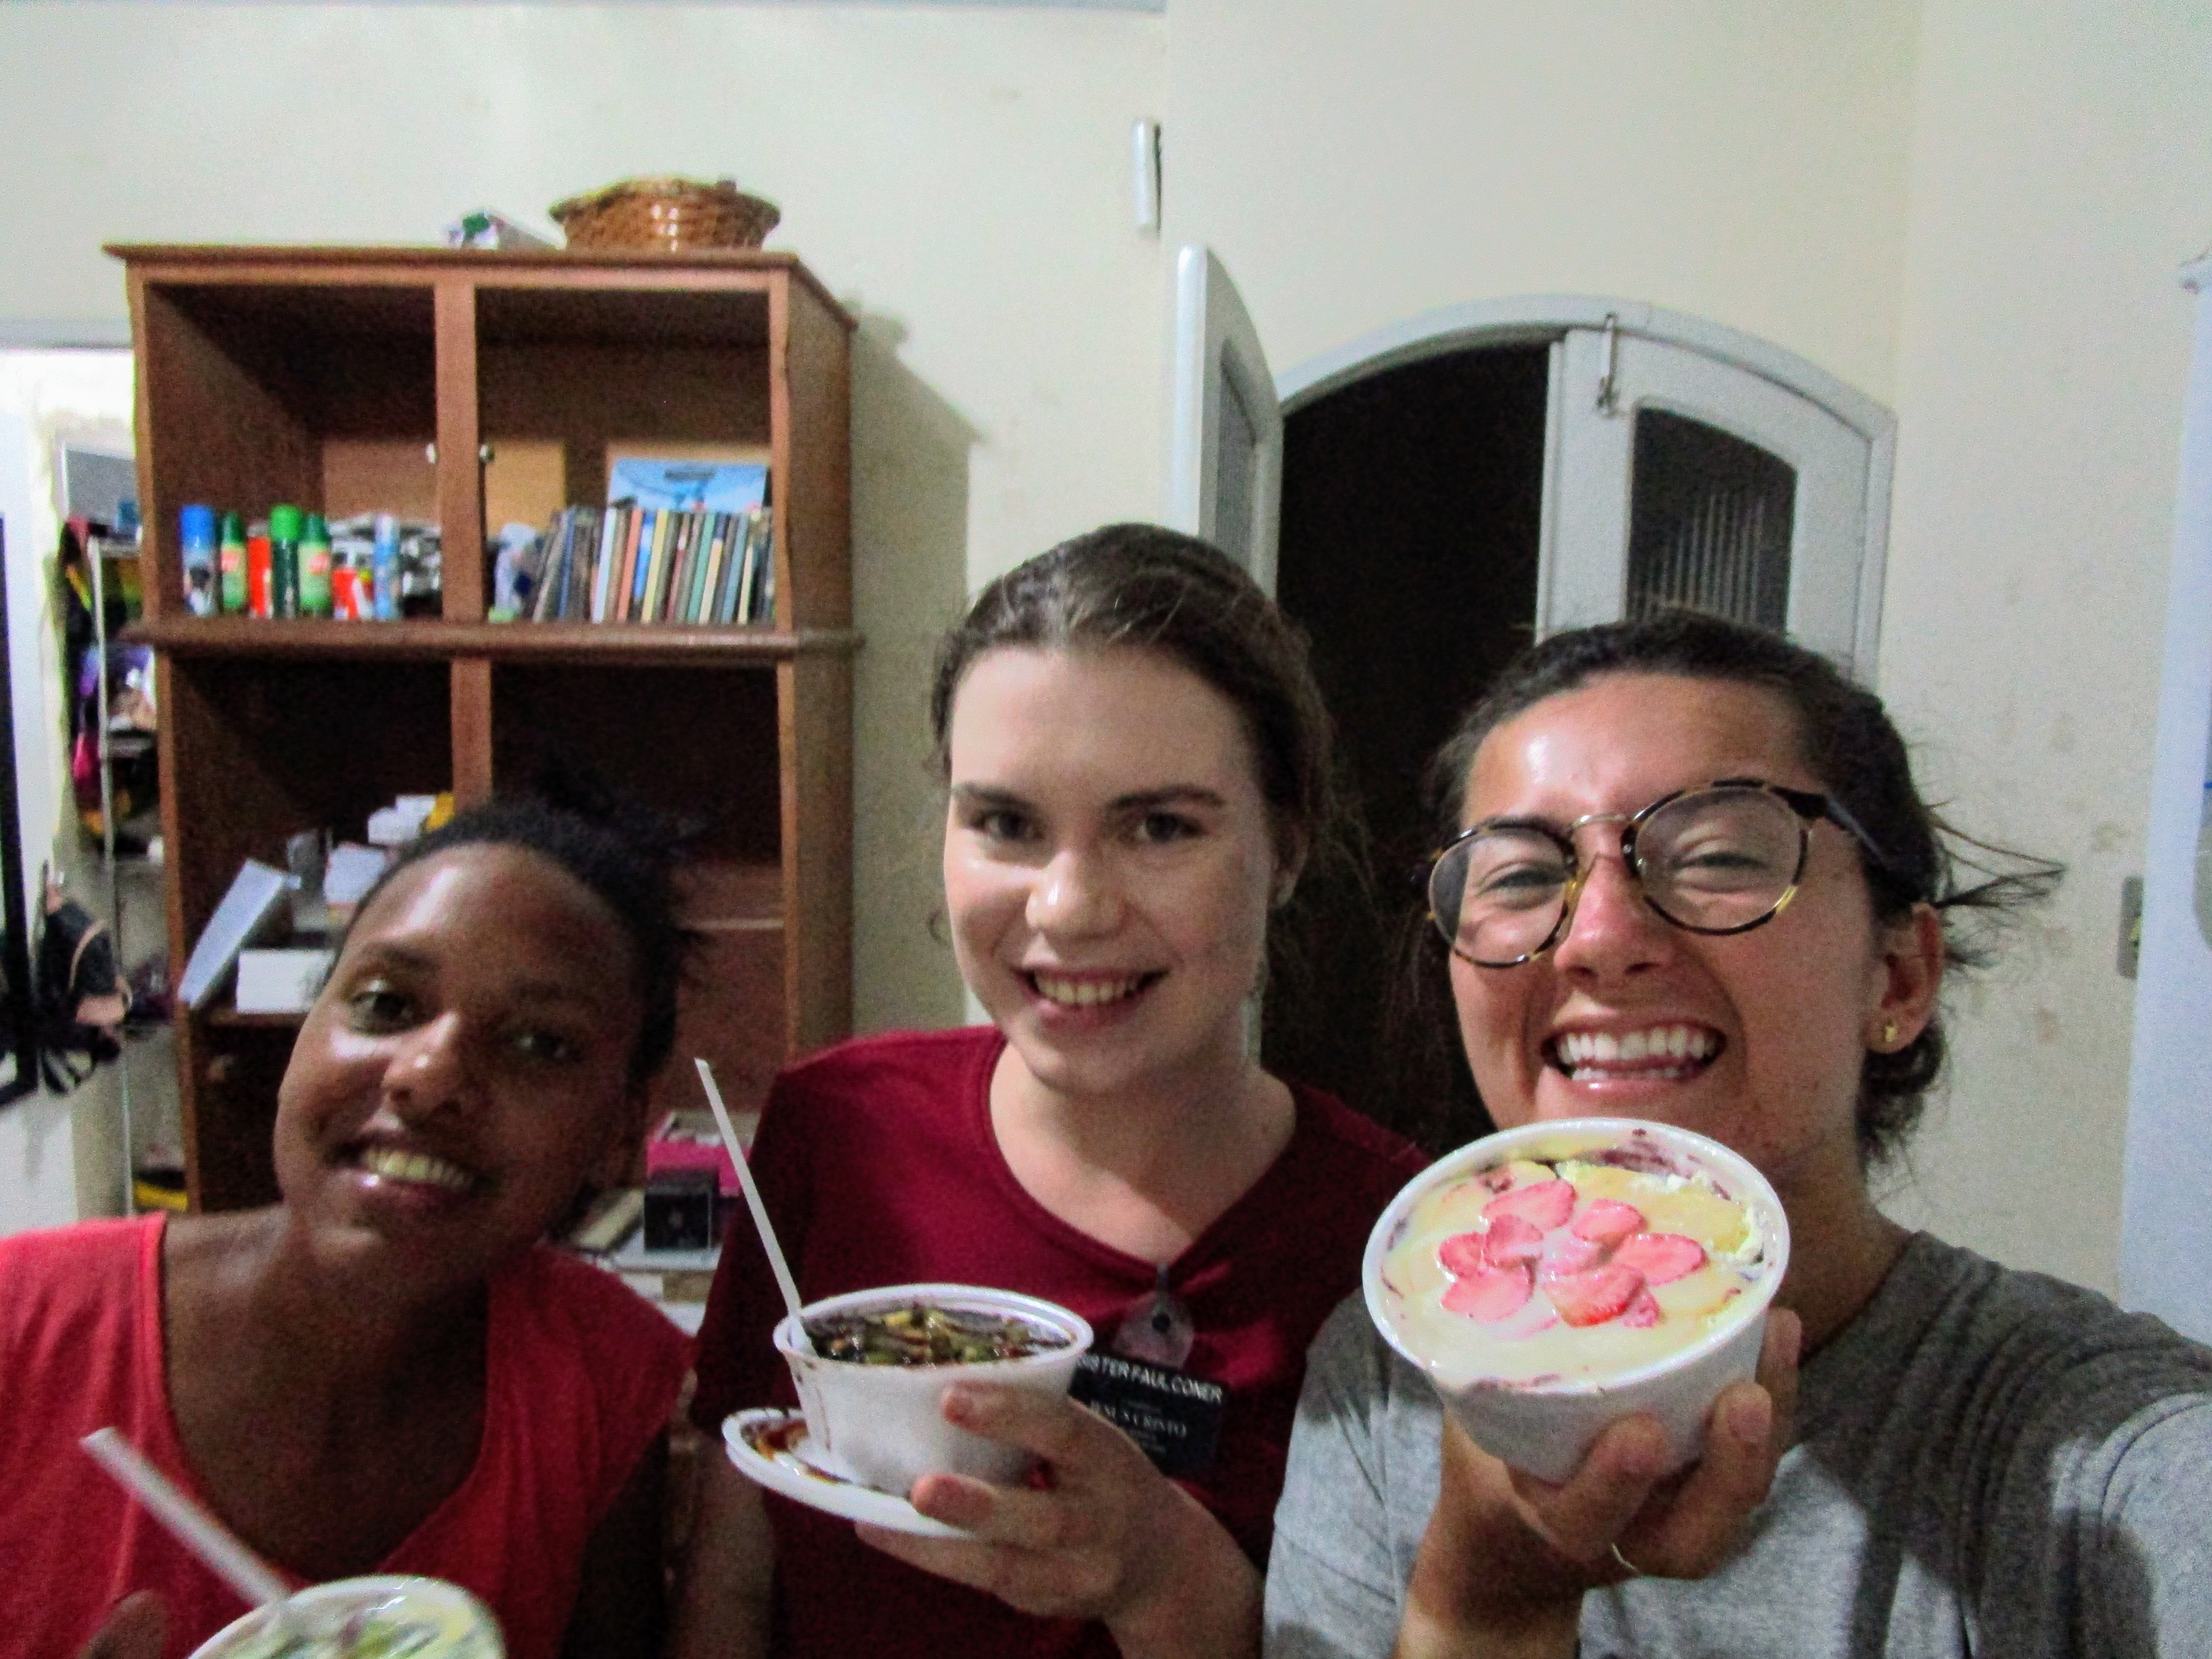 Sister missionaries for the Church of Jesus Christ of Latter-day Saints eating acai bowls.